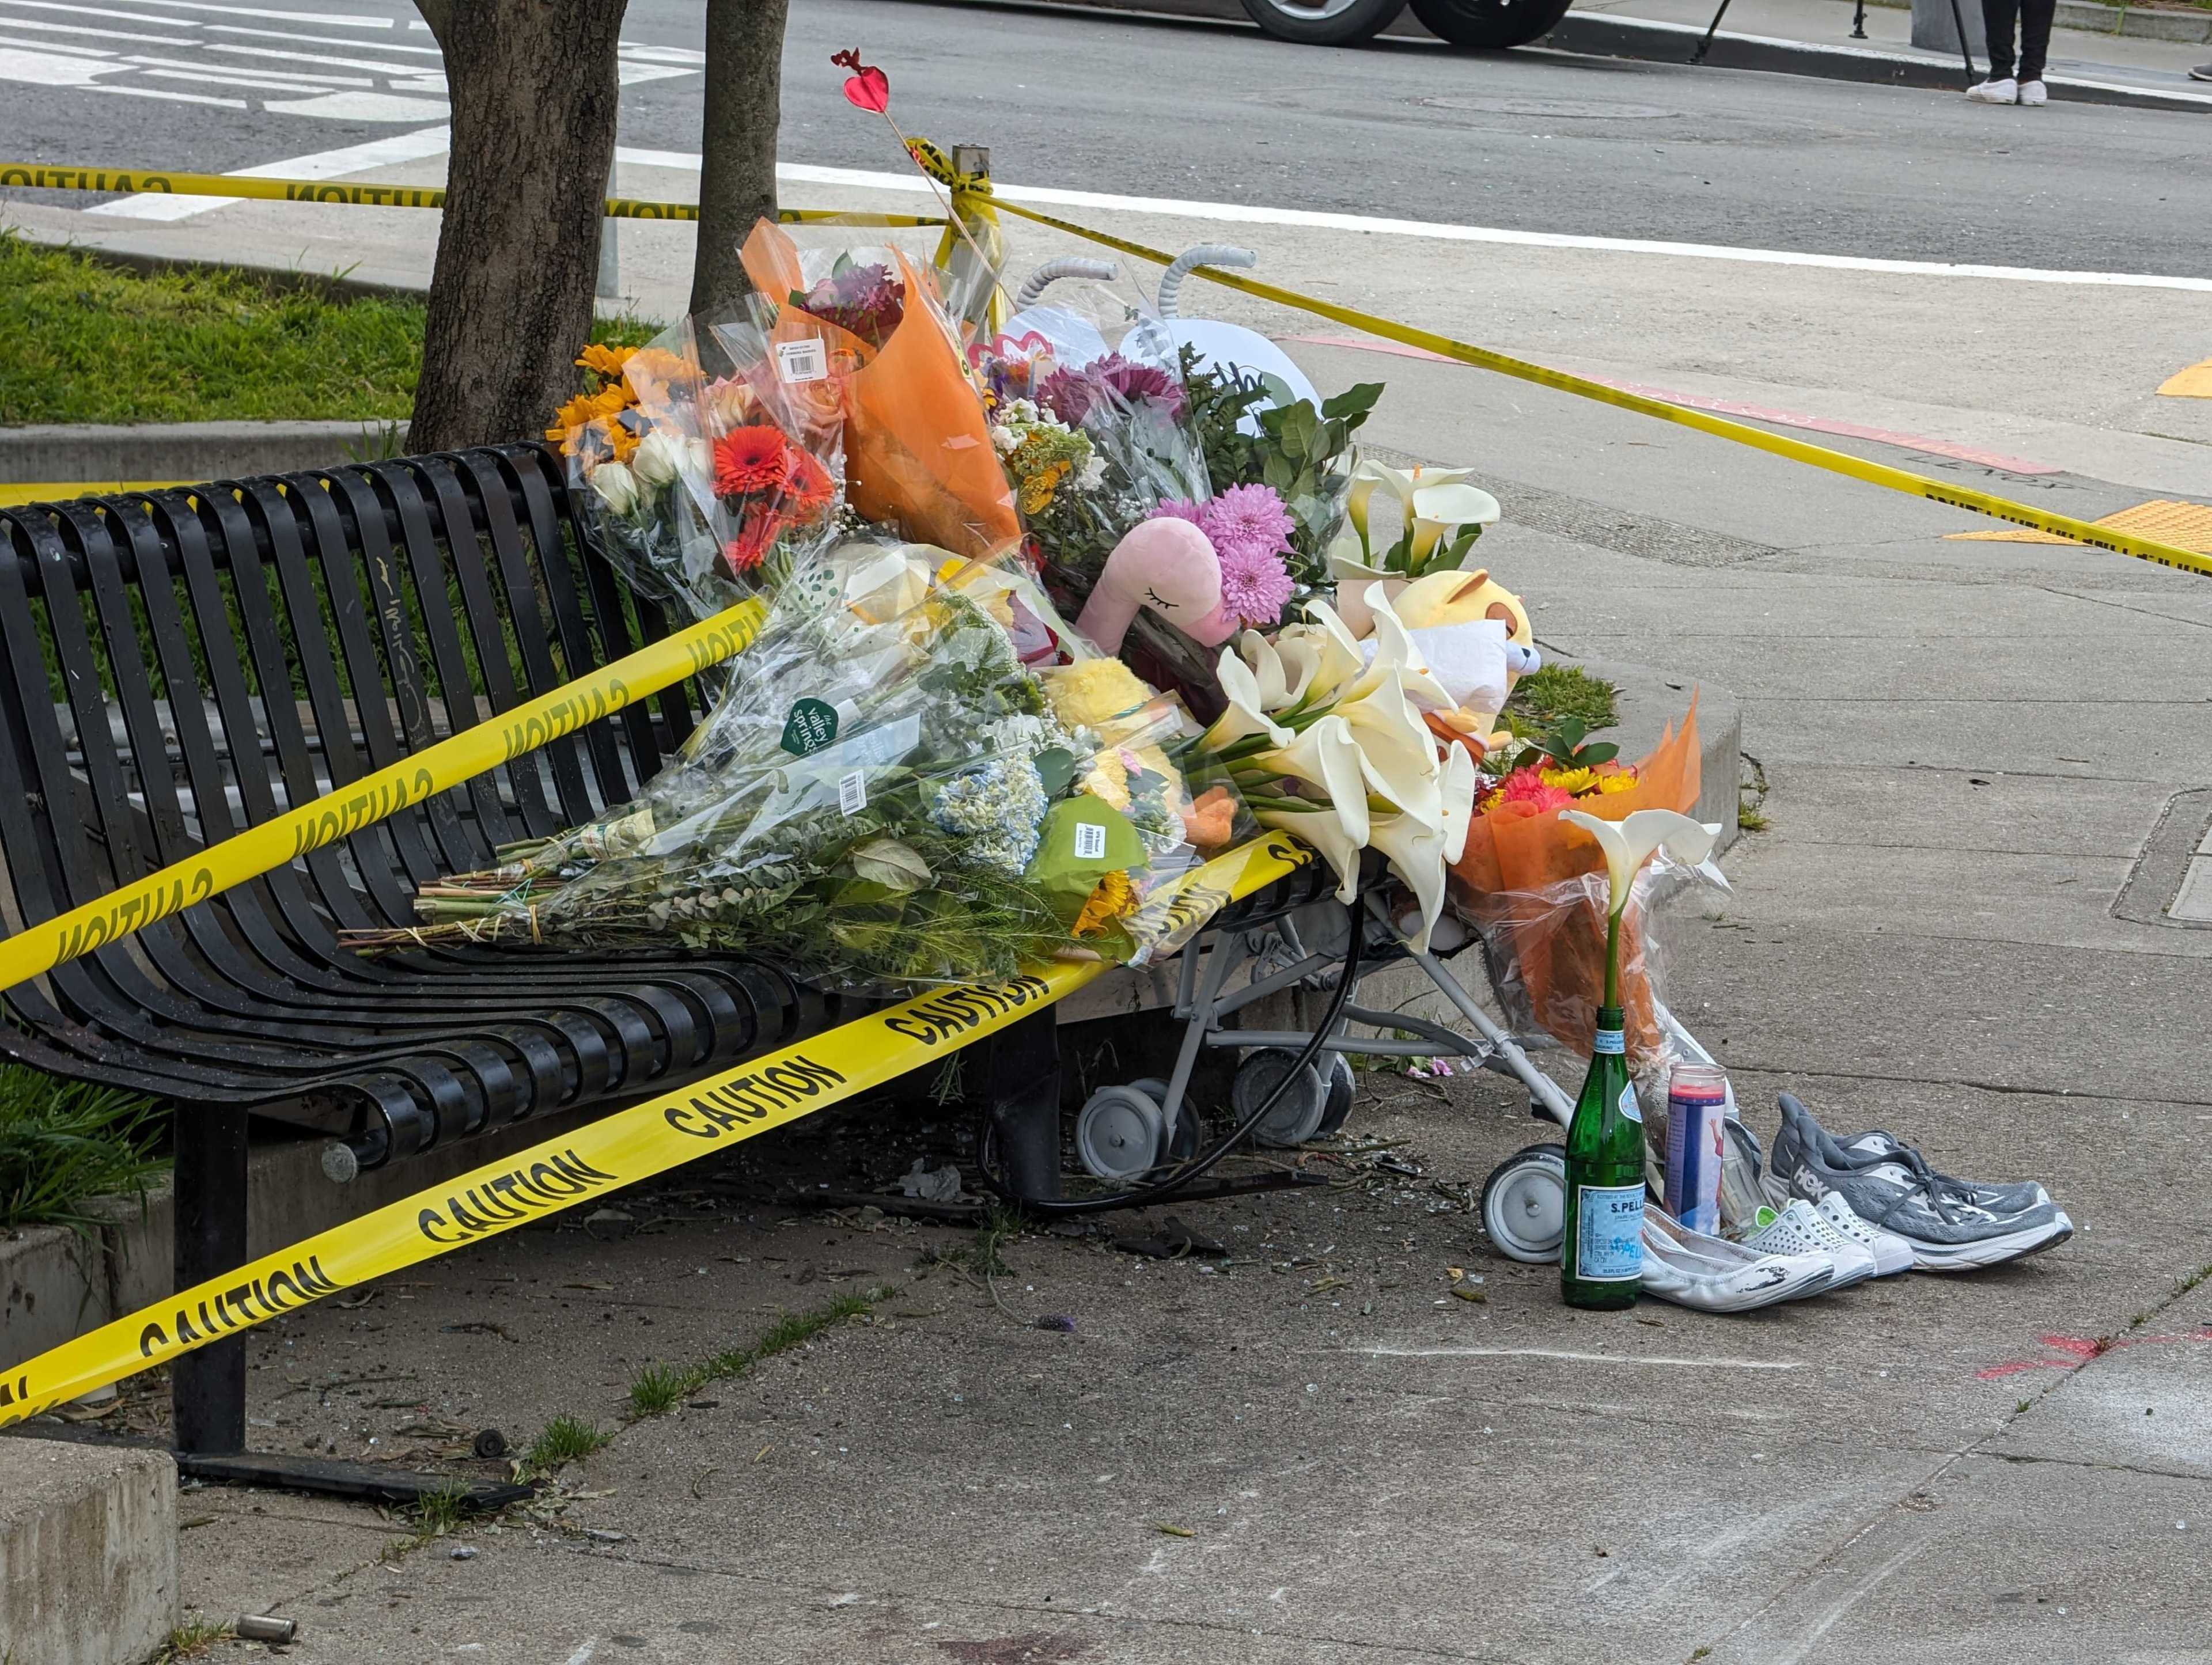 A sidewalk memorial with flowers, candles, and personal items, cordoned off by caution tape.